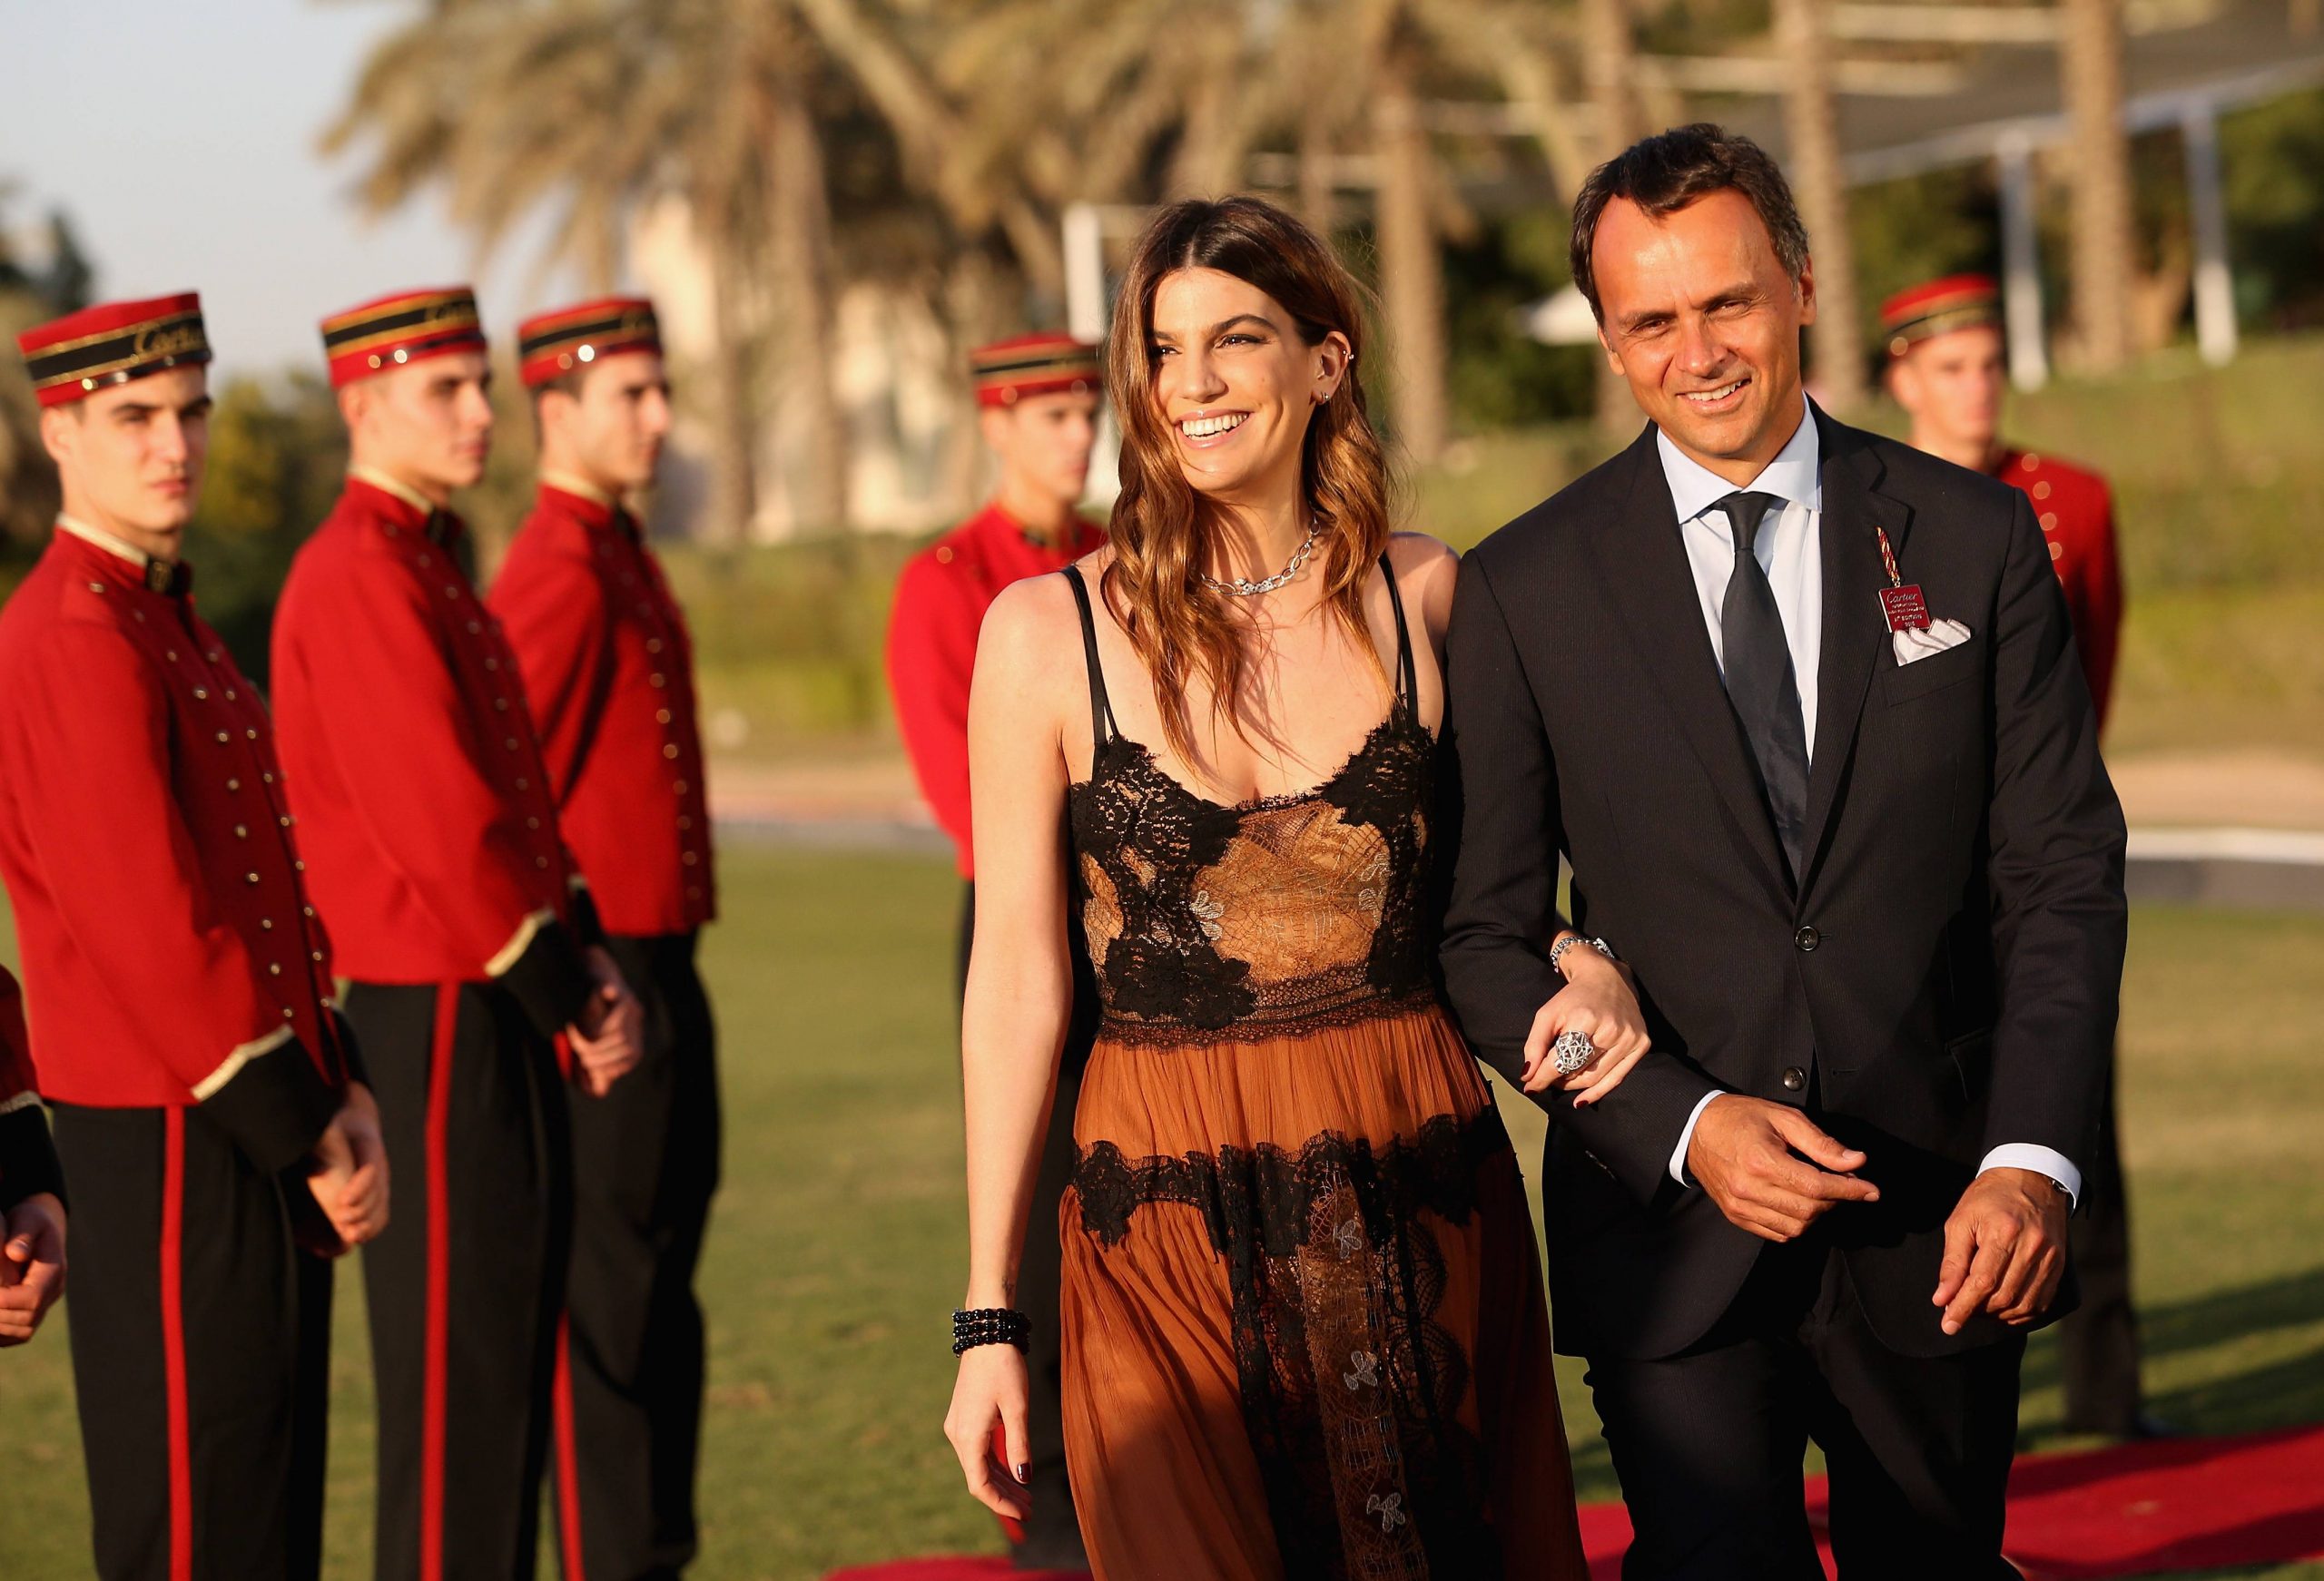 Bianca Brandolini and Regional Managing Director of Cartier Middle East, India and Africa Laurent Gabori attend the final day of Cartier International Dubai Polo Challenge 11th edition at Desert Palm Hotel.